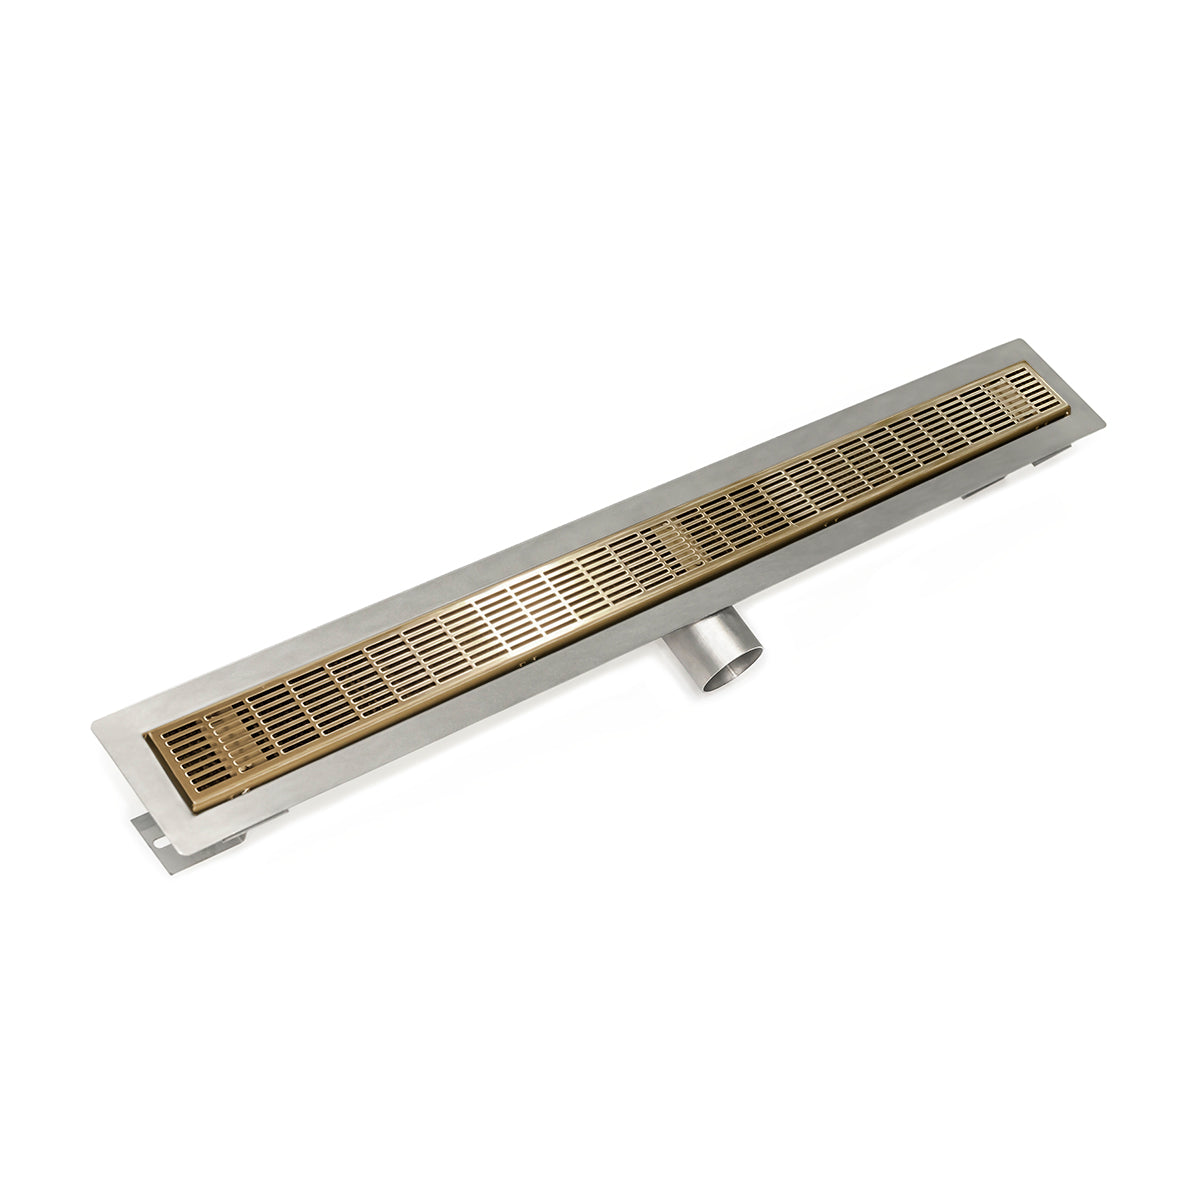 Infinity Drain 24" FT Series Side Outlet Linear Drain Kit with 2 1/2" Perforated Slotted Grate